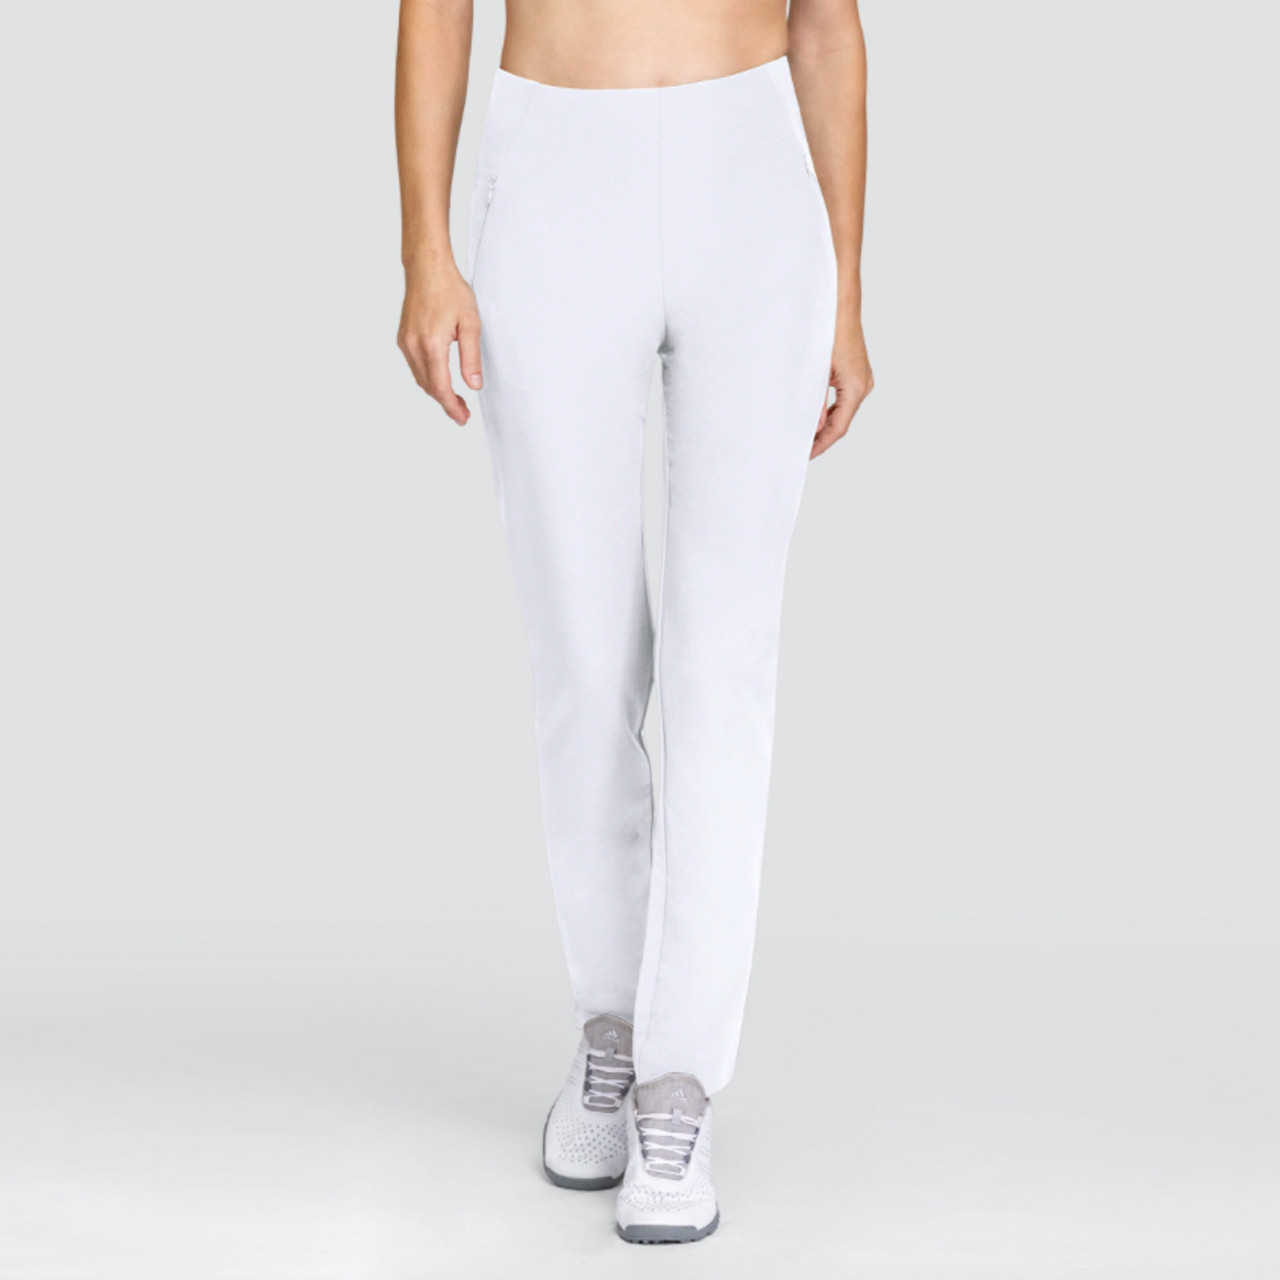 Tail Allure Long Golf Pant